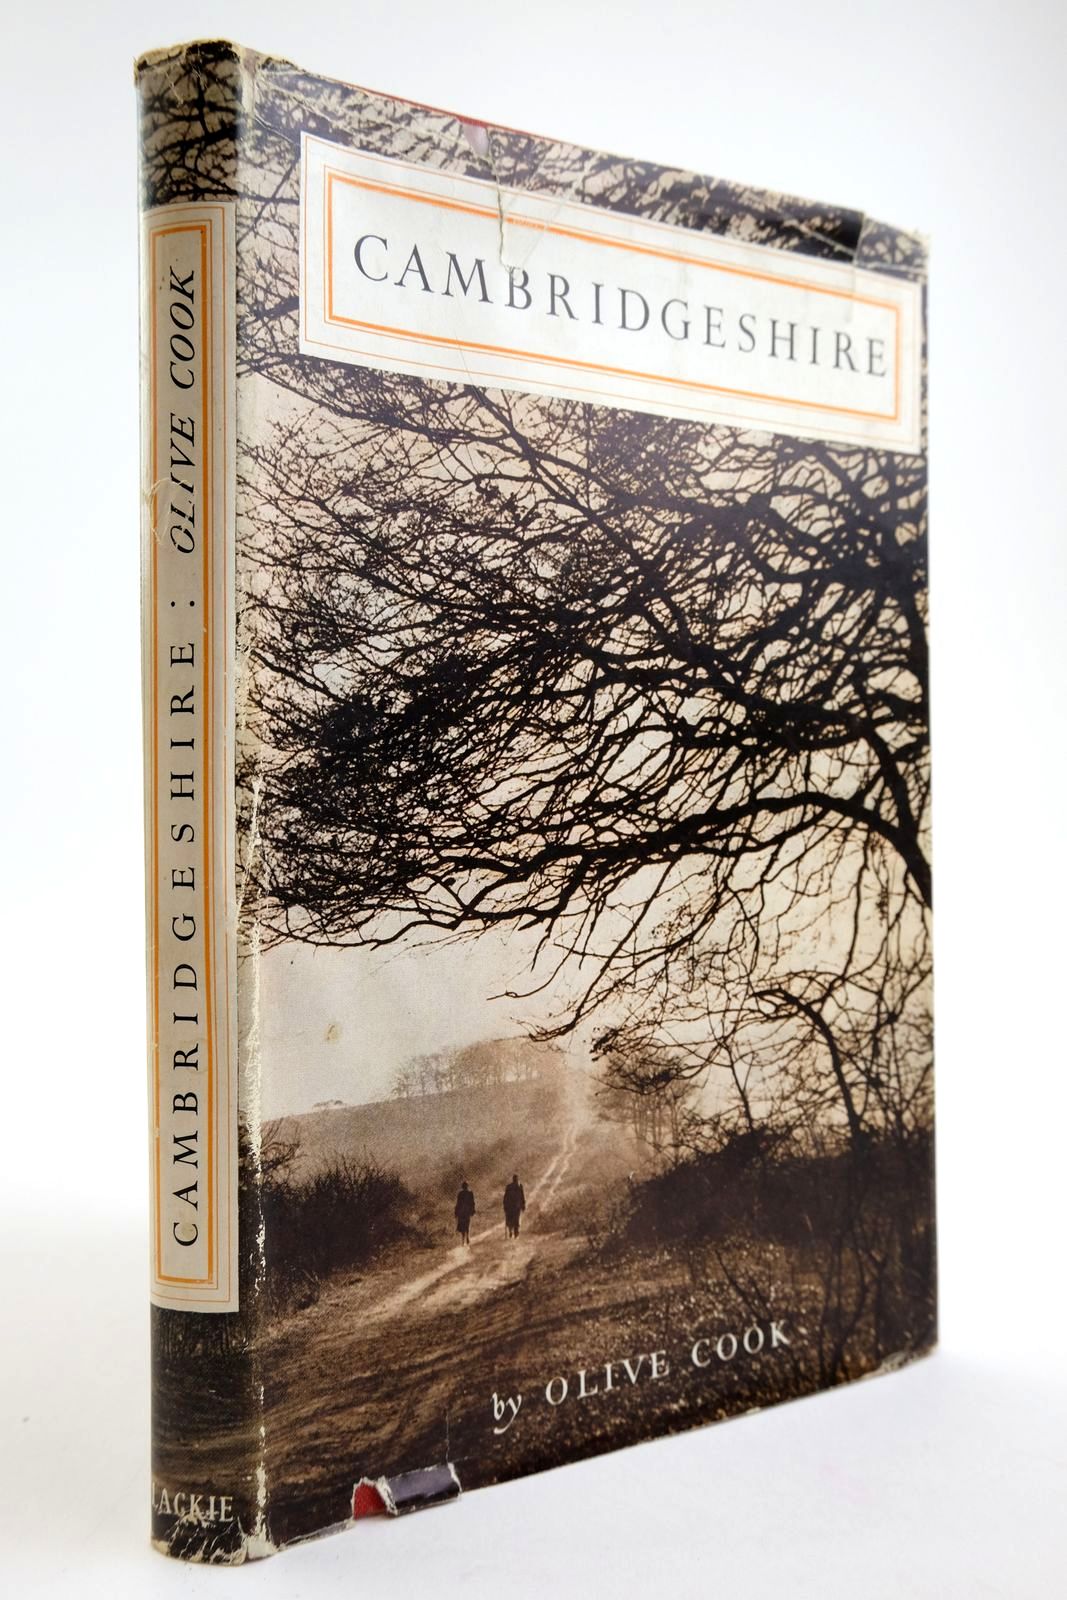 Photo of CAMBRIDGESHIRE written by Cook, Olive published by Blackie &amp; Son Ltd. (STOCK CODE: 2133689)  for sale by Stella & Rose's Books